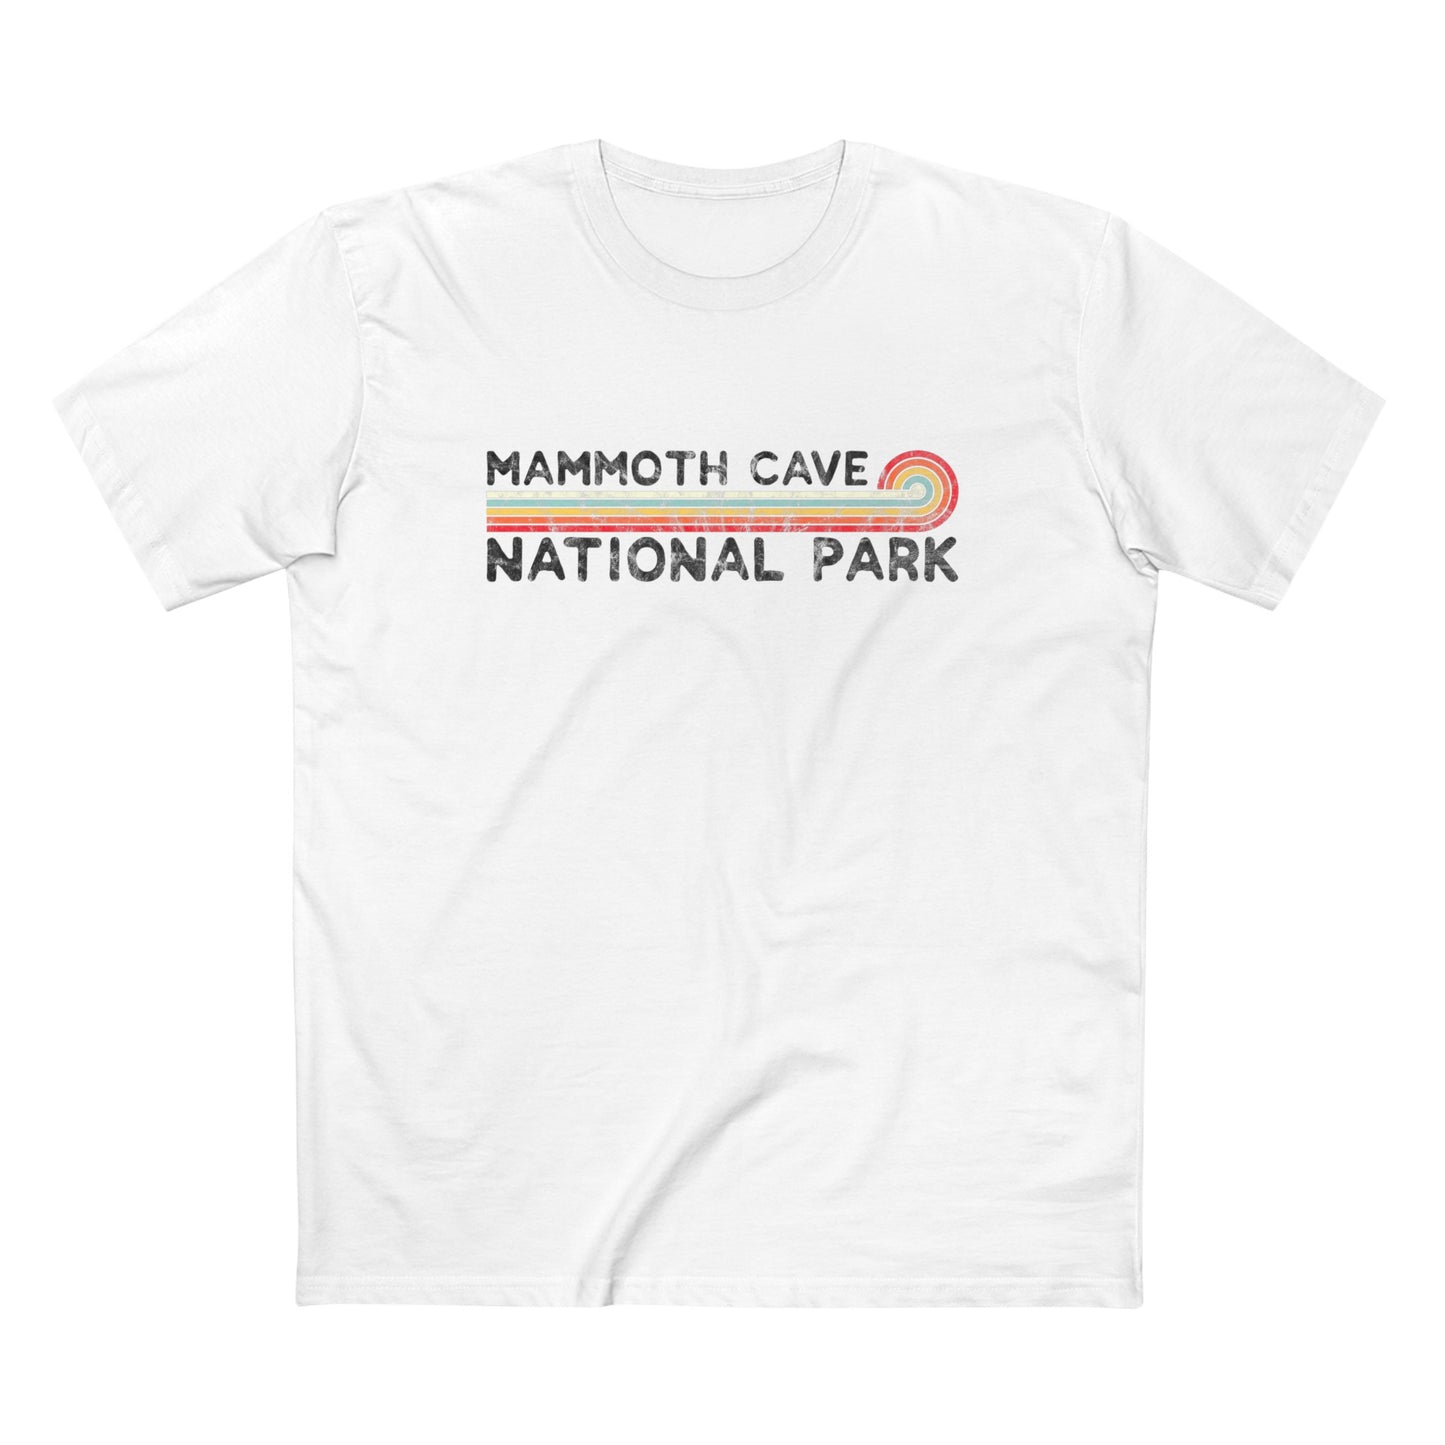 Mammoth Cave National Park T-Shirt - Vintage Stretched Sunrise